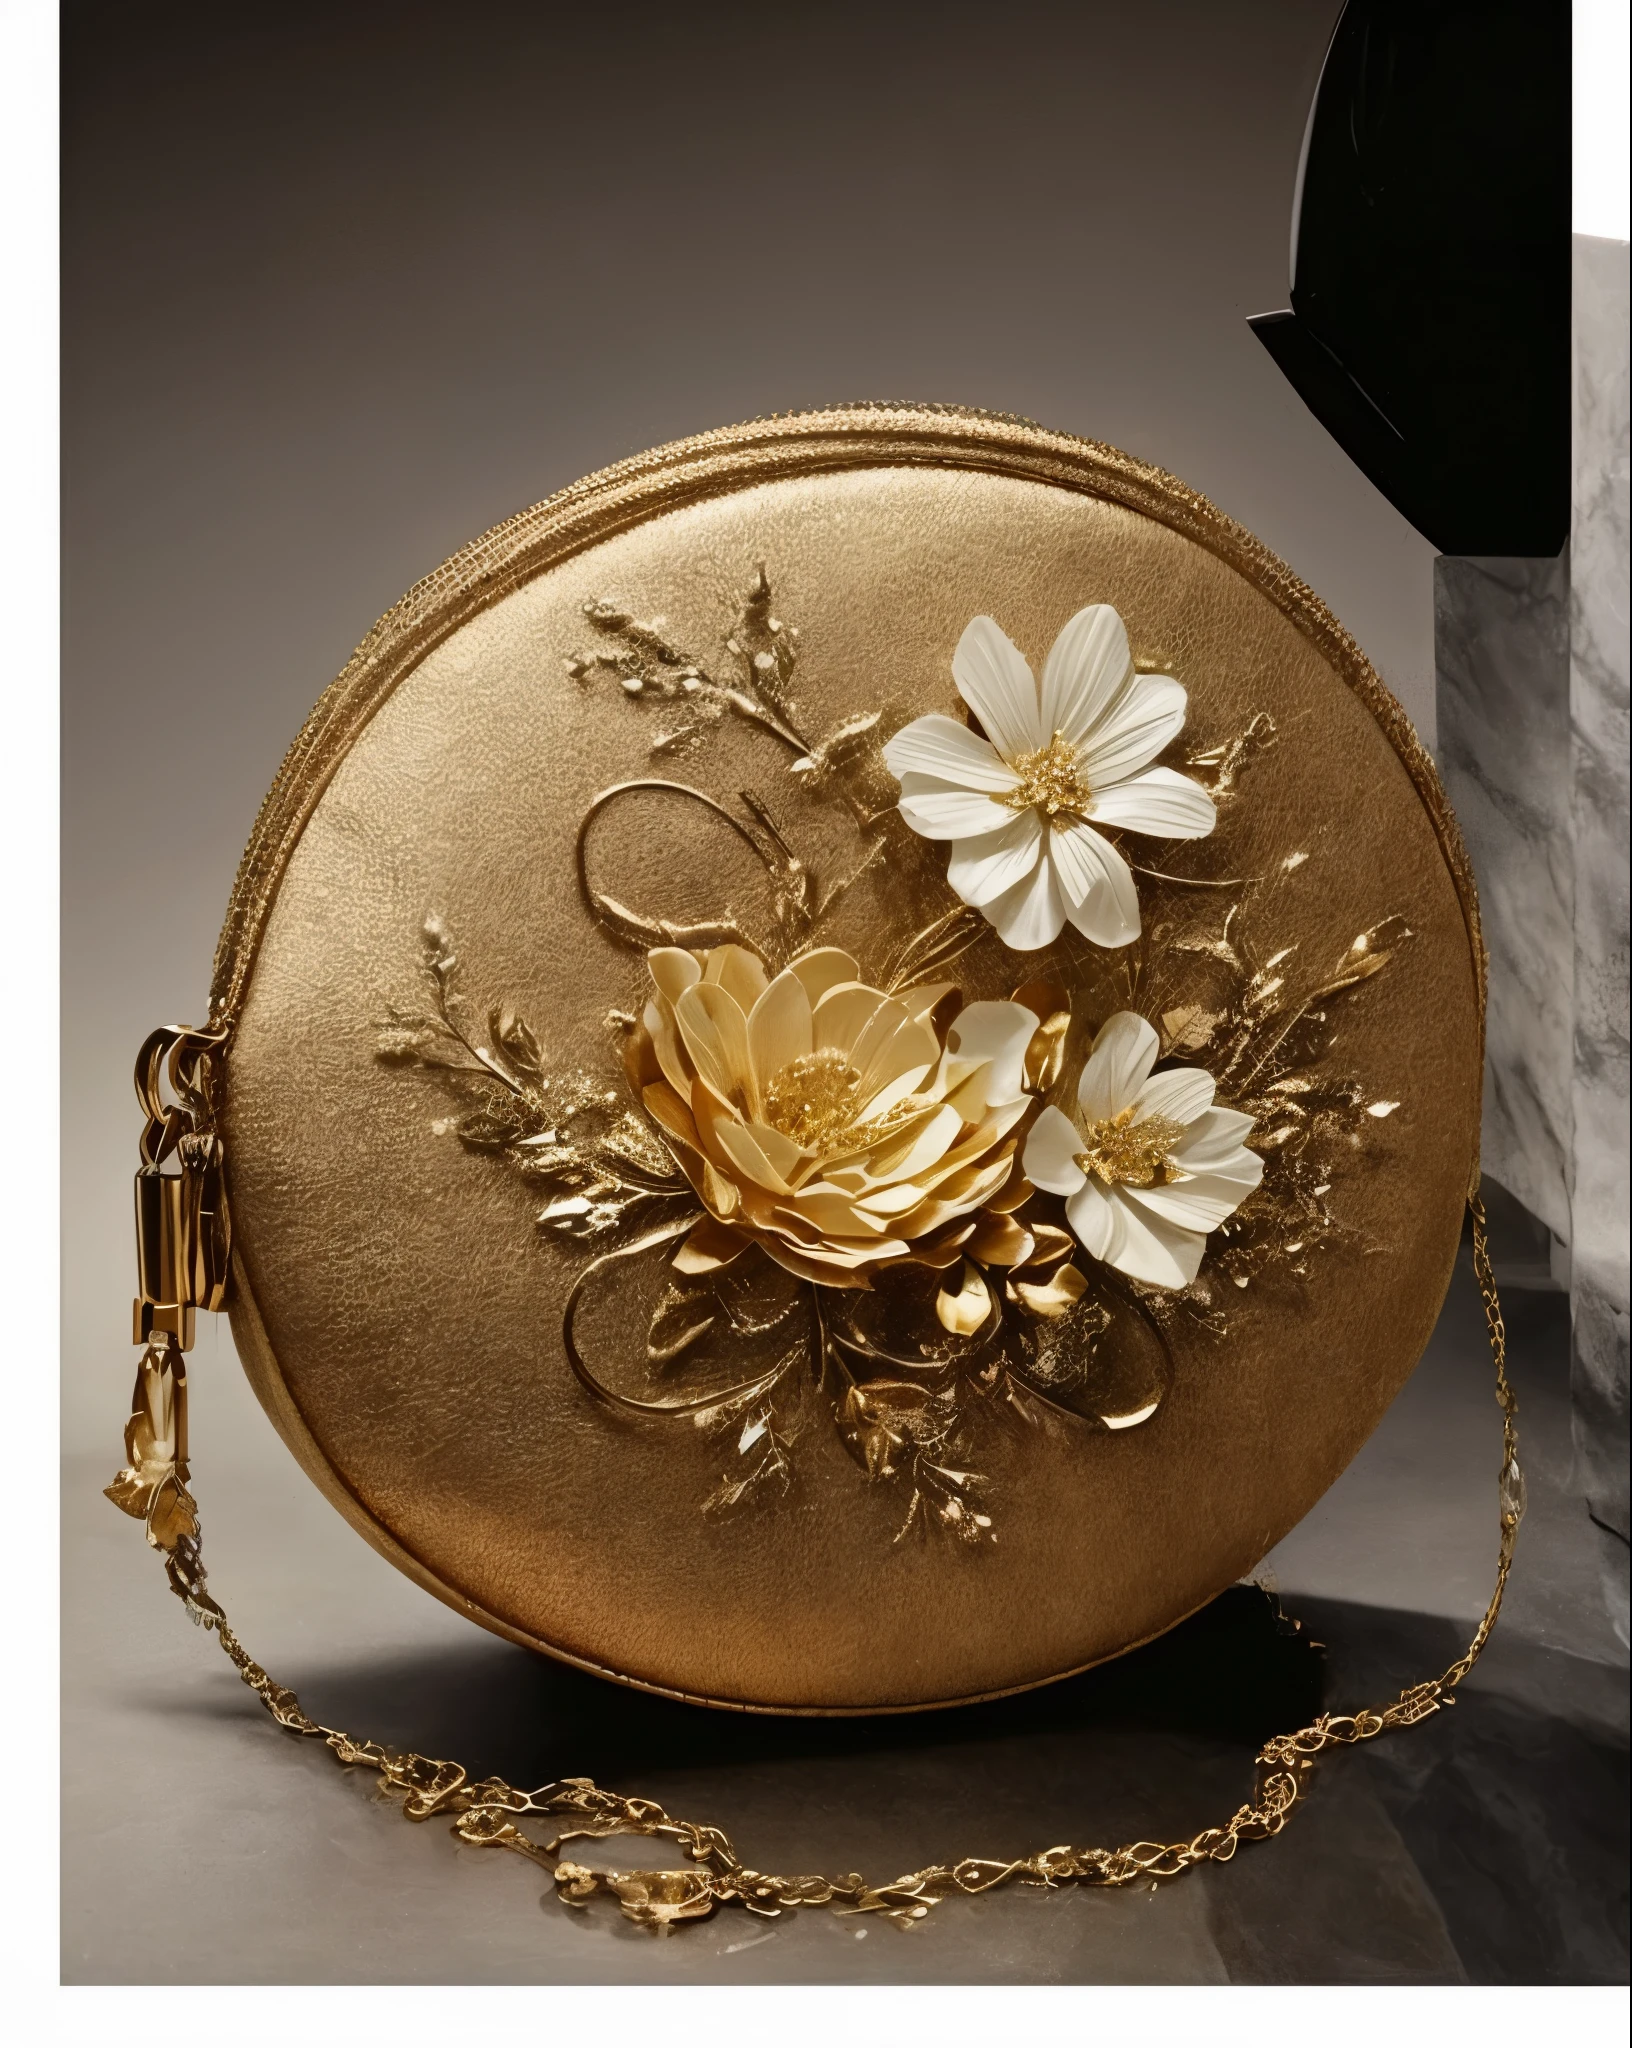 Masterpiece, Super detail, 16K, Top image quality, Very complex and detailed details, a close up of a purse with a small perfume bottle and a brush, with metal flower decoration, Art direction set up, givenchy, Serge Lutens, Luxury brand, ivory makeup, perfume, Product photography, Chaumet Paris style, inspiration, Beautiful luxury, fair